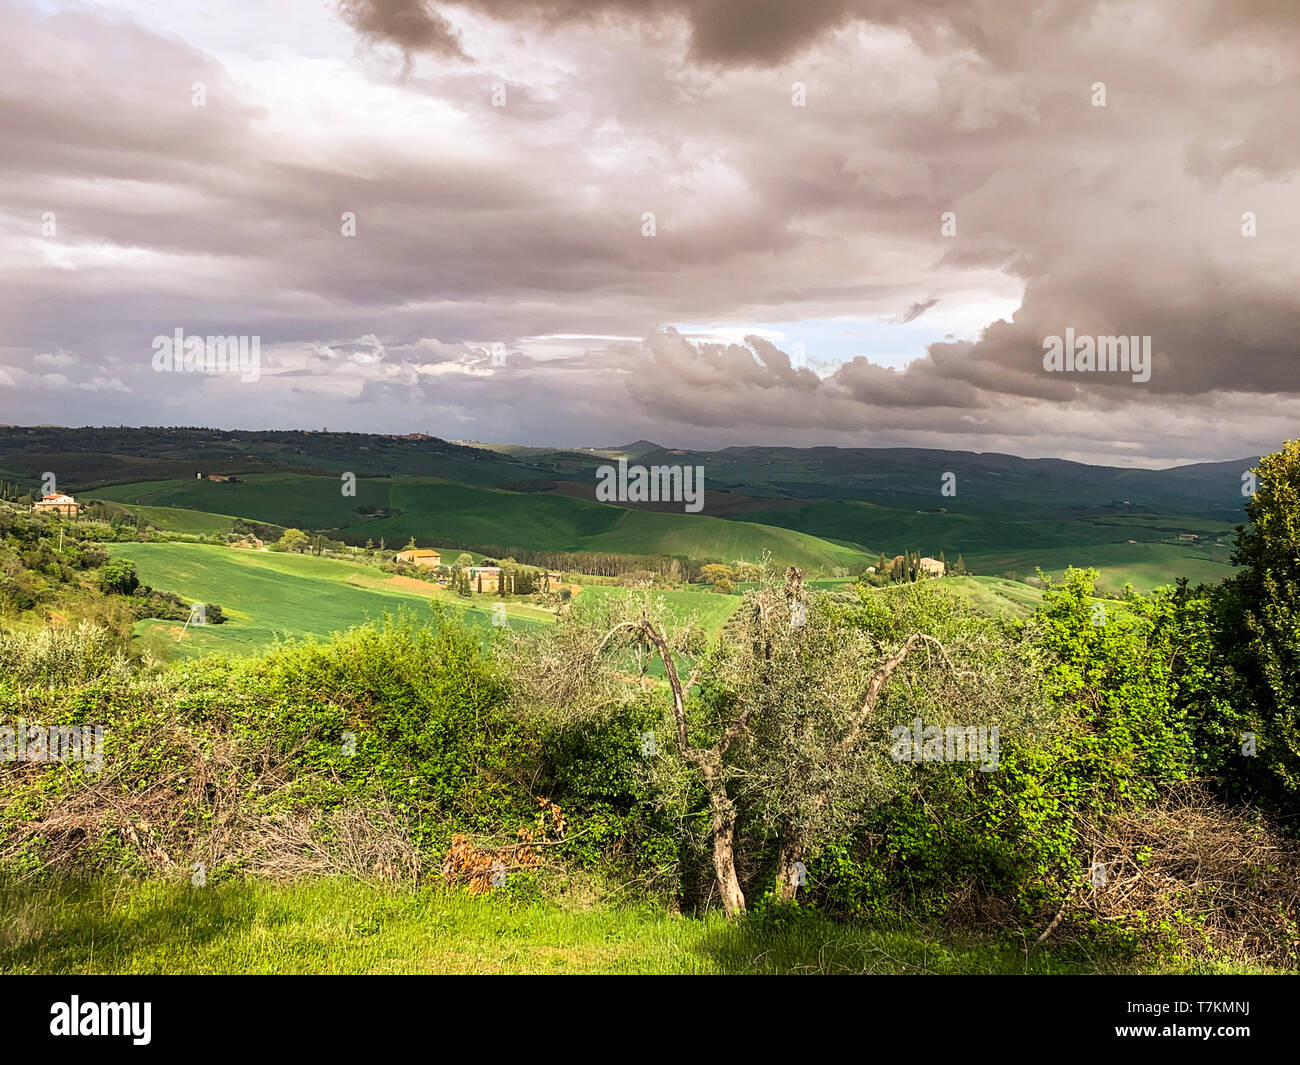 Landscape at sunset. Sinuous green hills at dusk. Stock Photo